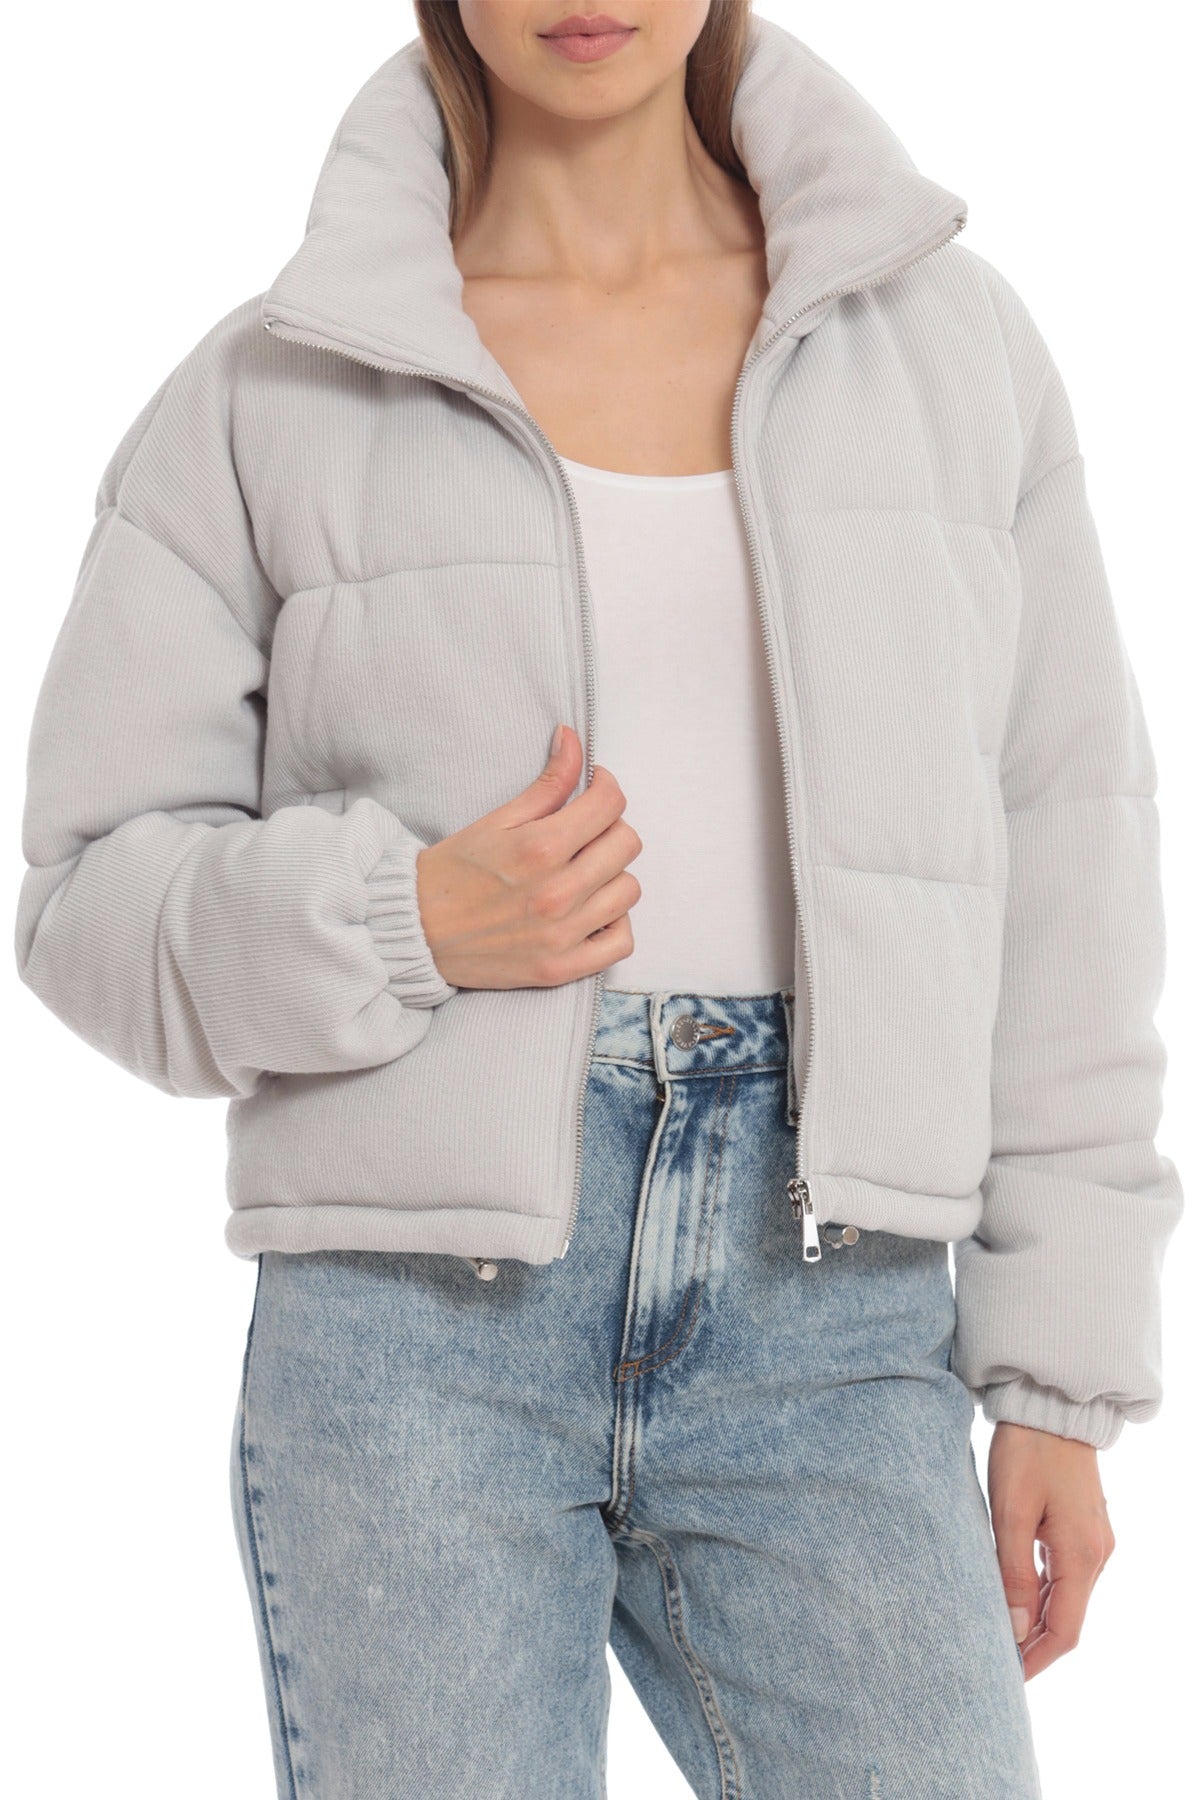 Light Grey Knit Jacket Puffer outerwear coat by Bagatelle for ladies